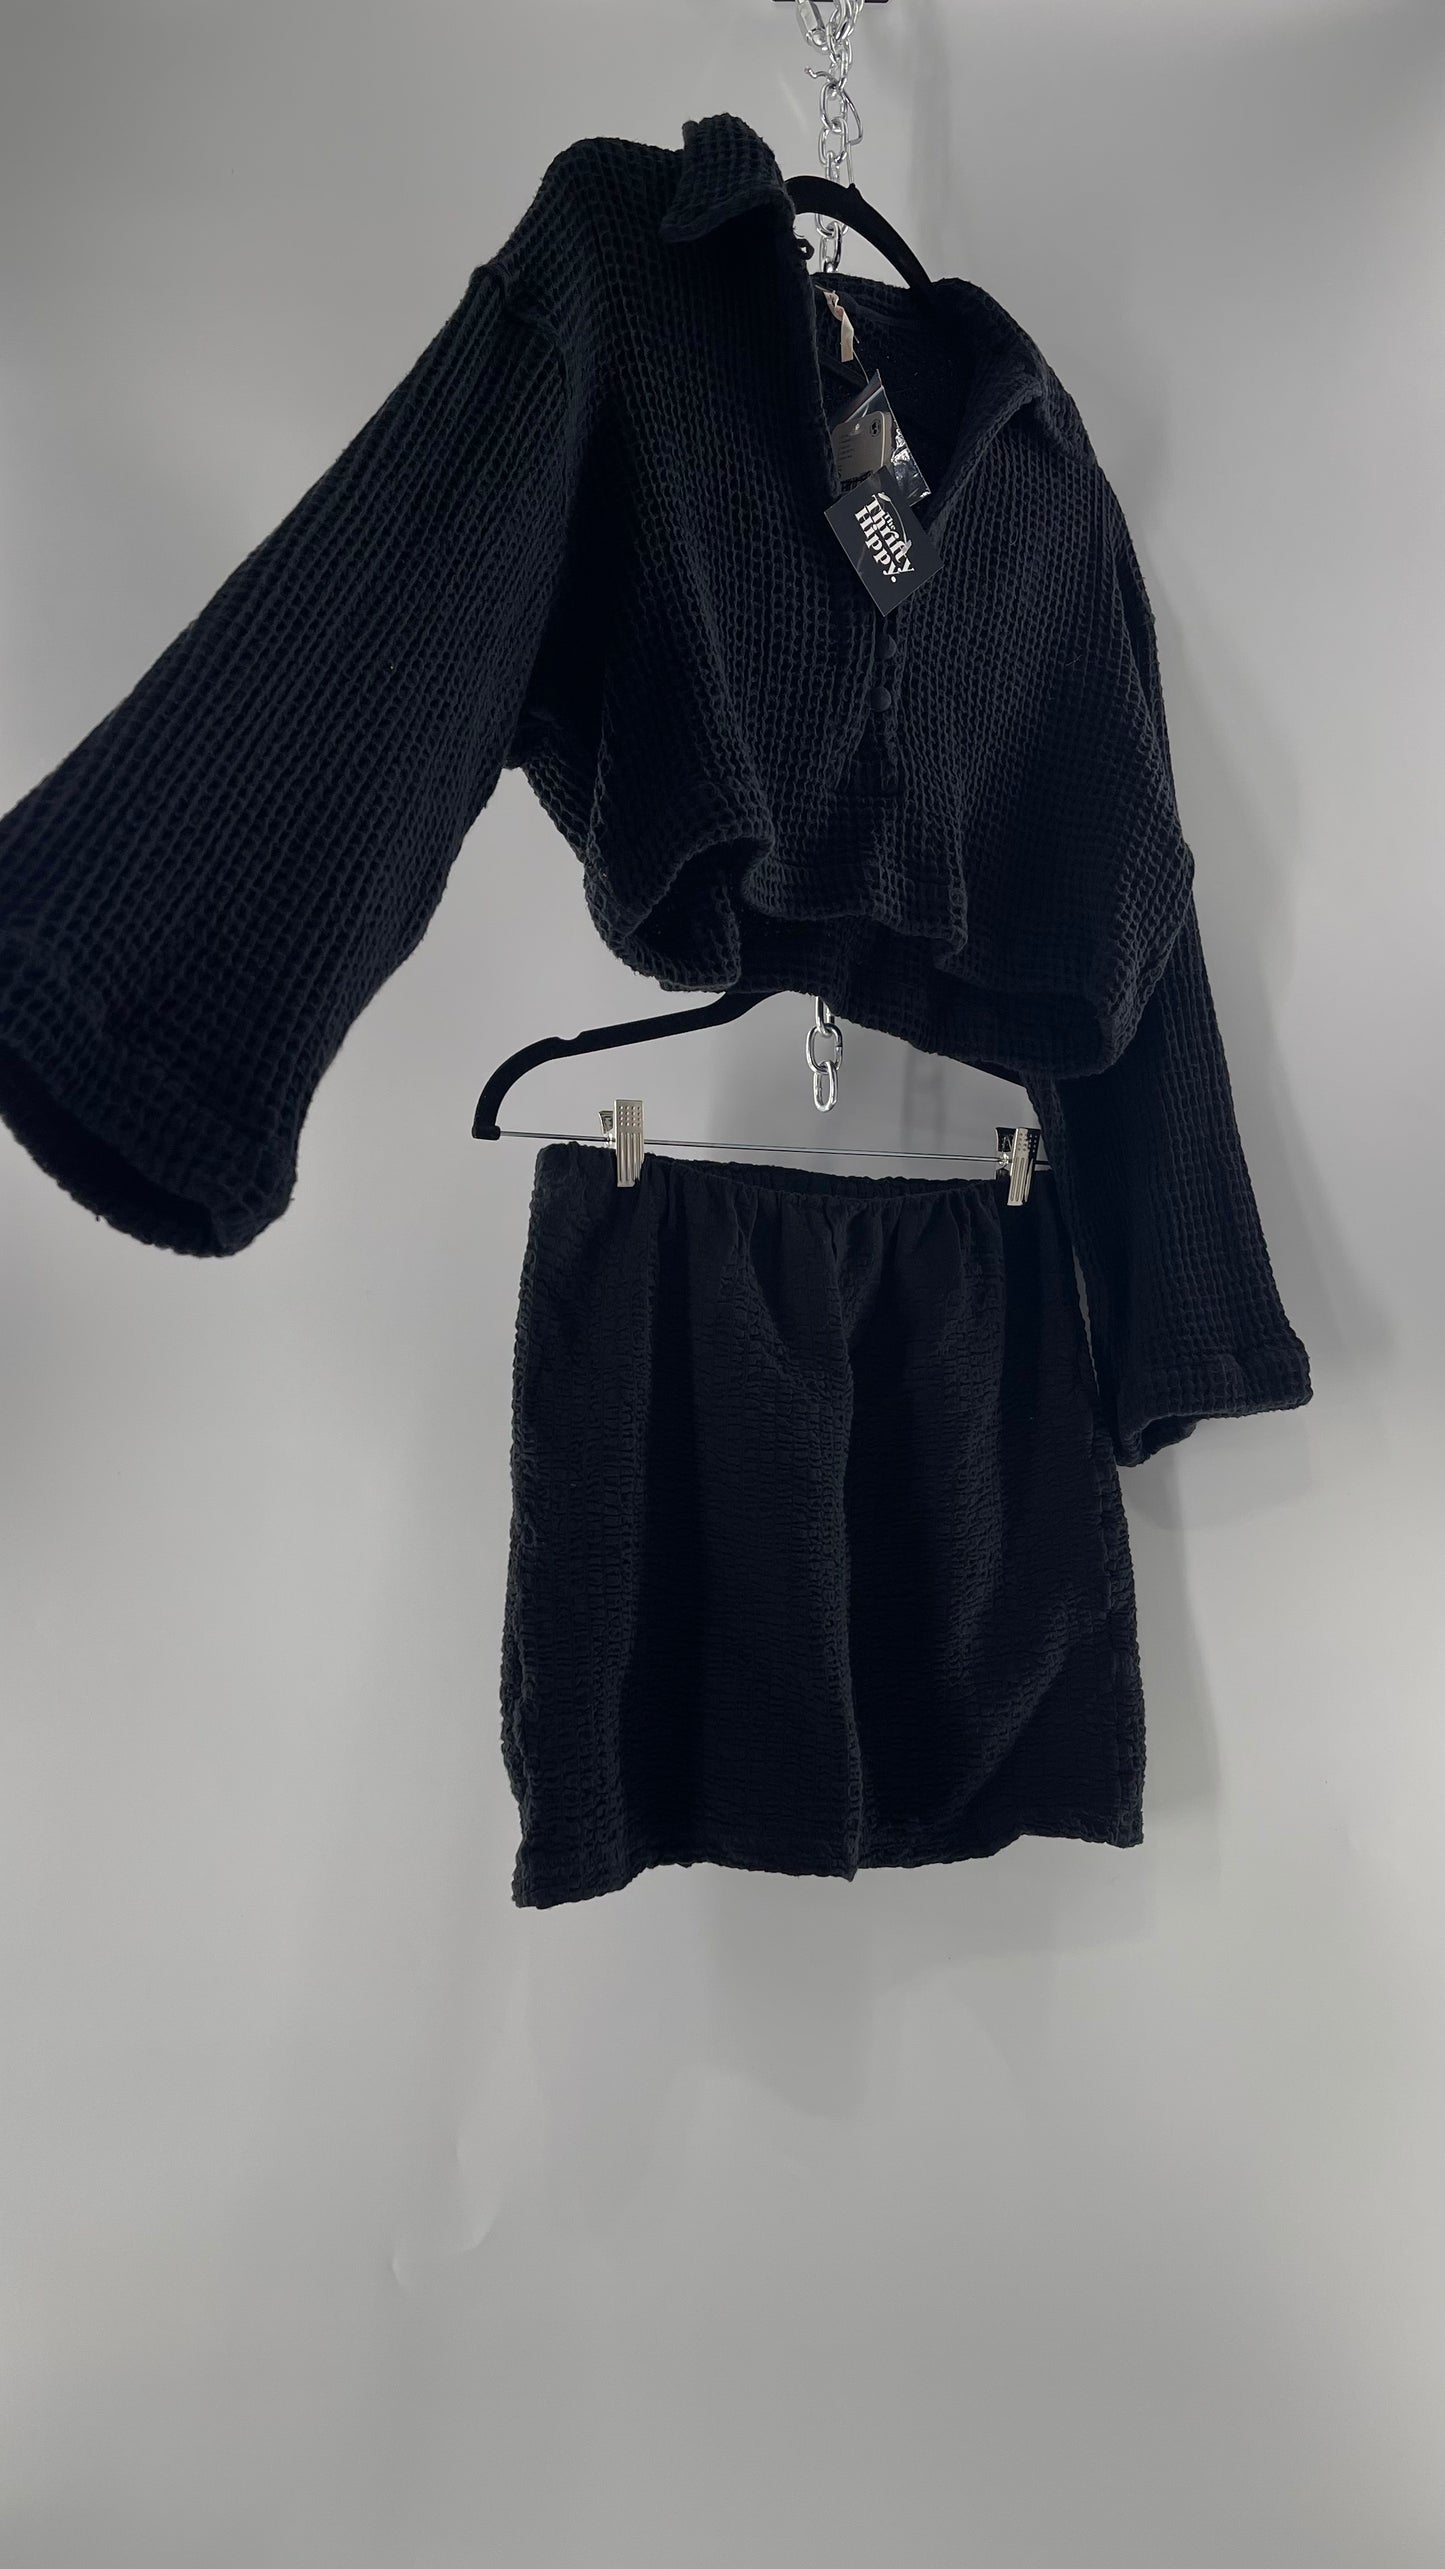 Free People Waffle Knit Black Cropped Button Up and Skirt Set with Tags Attached (Small)